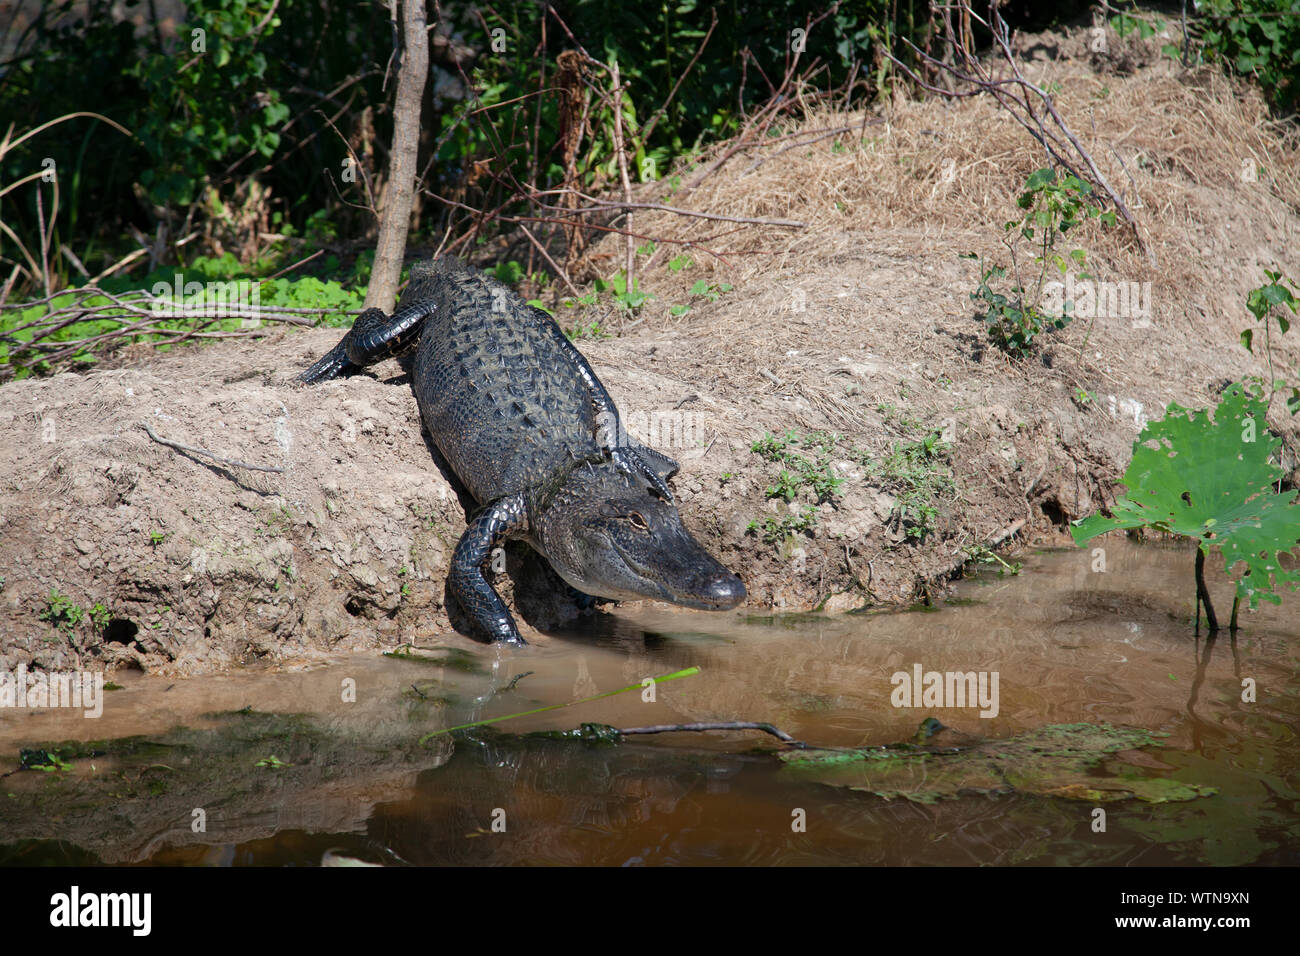 An American alligator on the bank of a lake in East Texas Stock Photo -  Alamy